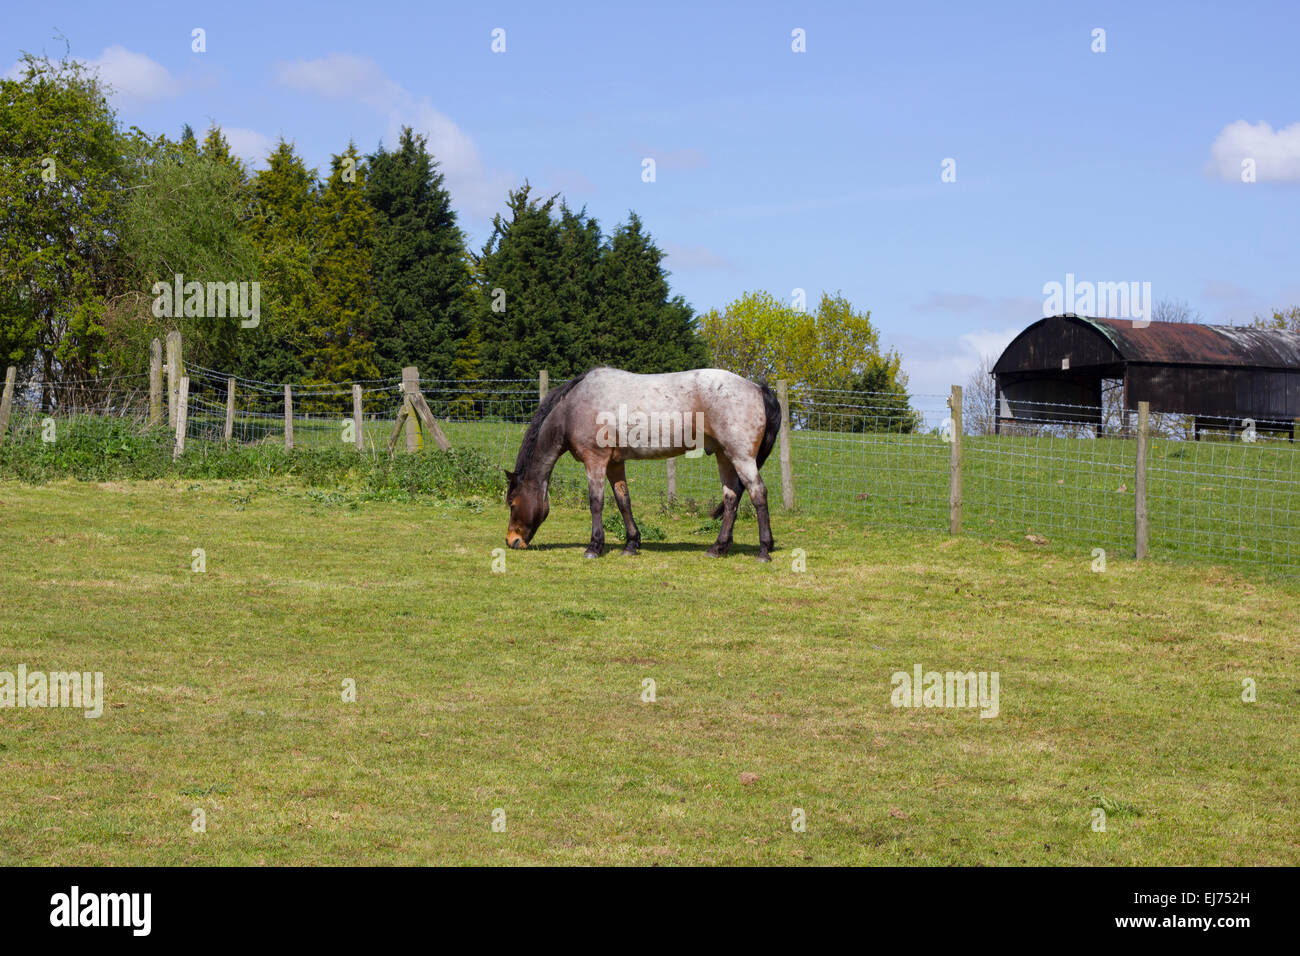 Equestrian landscape including a horse in a paddock and a metal barn in the back ground with a line of trees Stock Photo